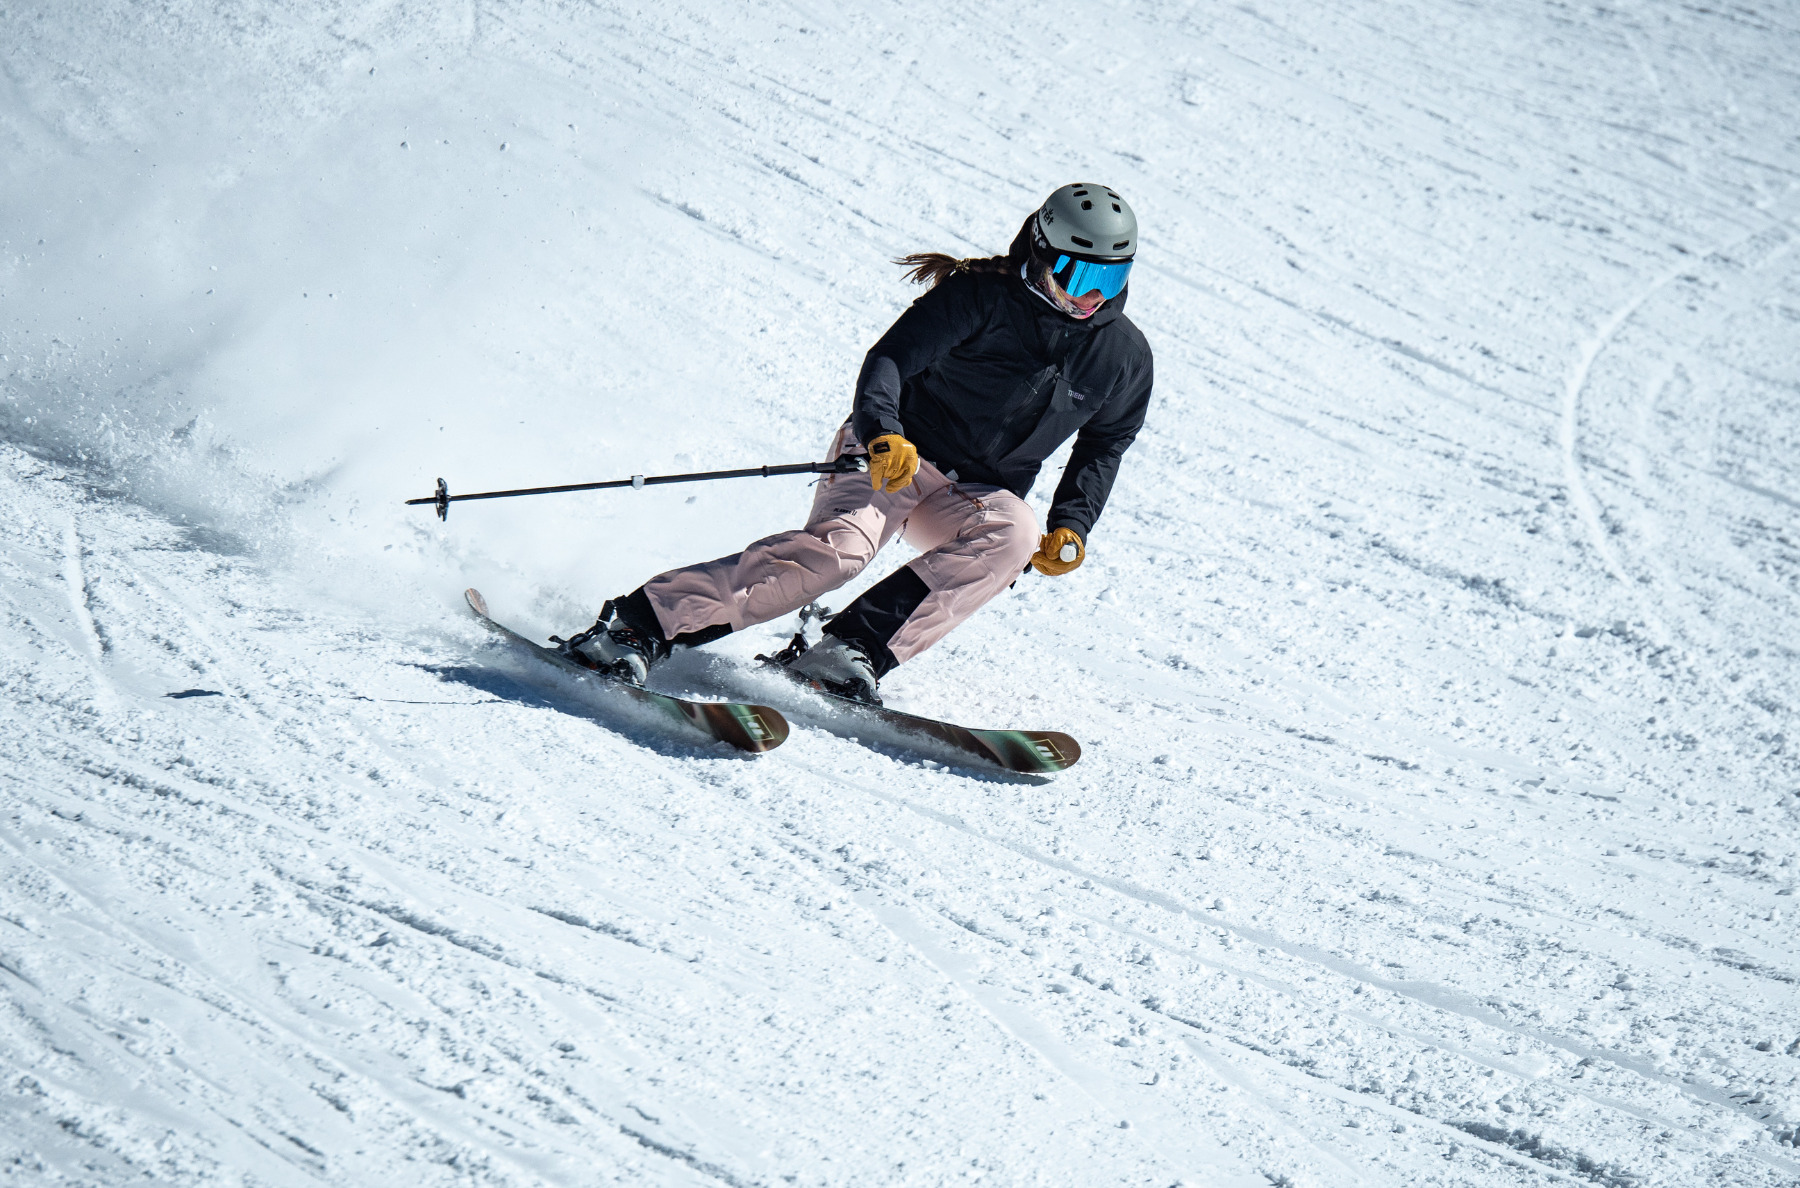 Kara Williard in the Maurader Elite with Happy Boost (Crested Butte Mountain Resort, CO)